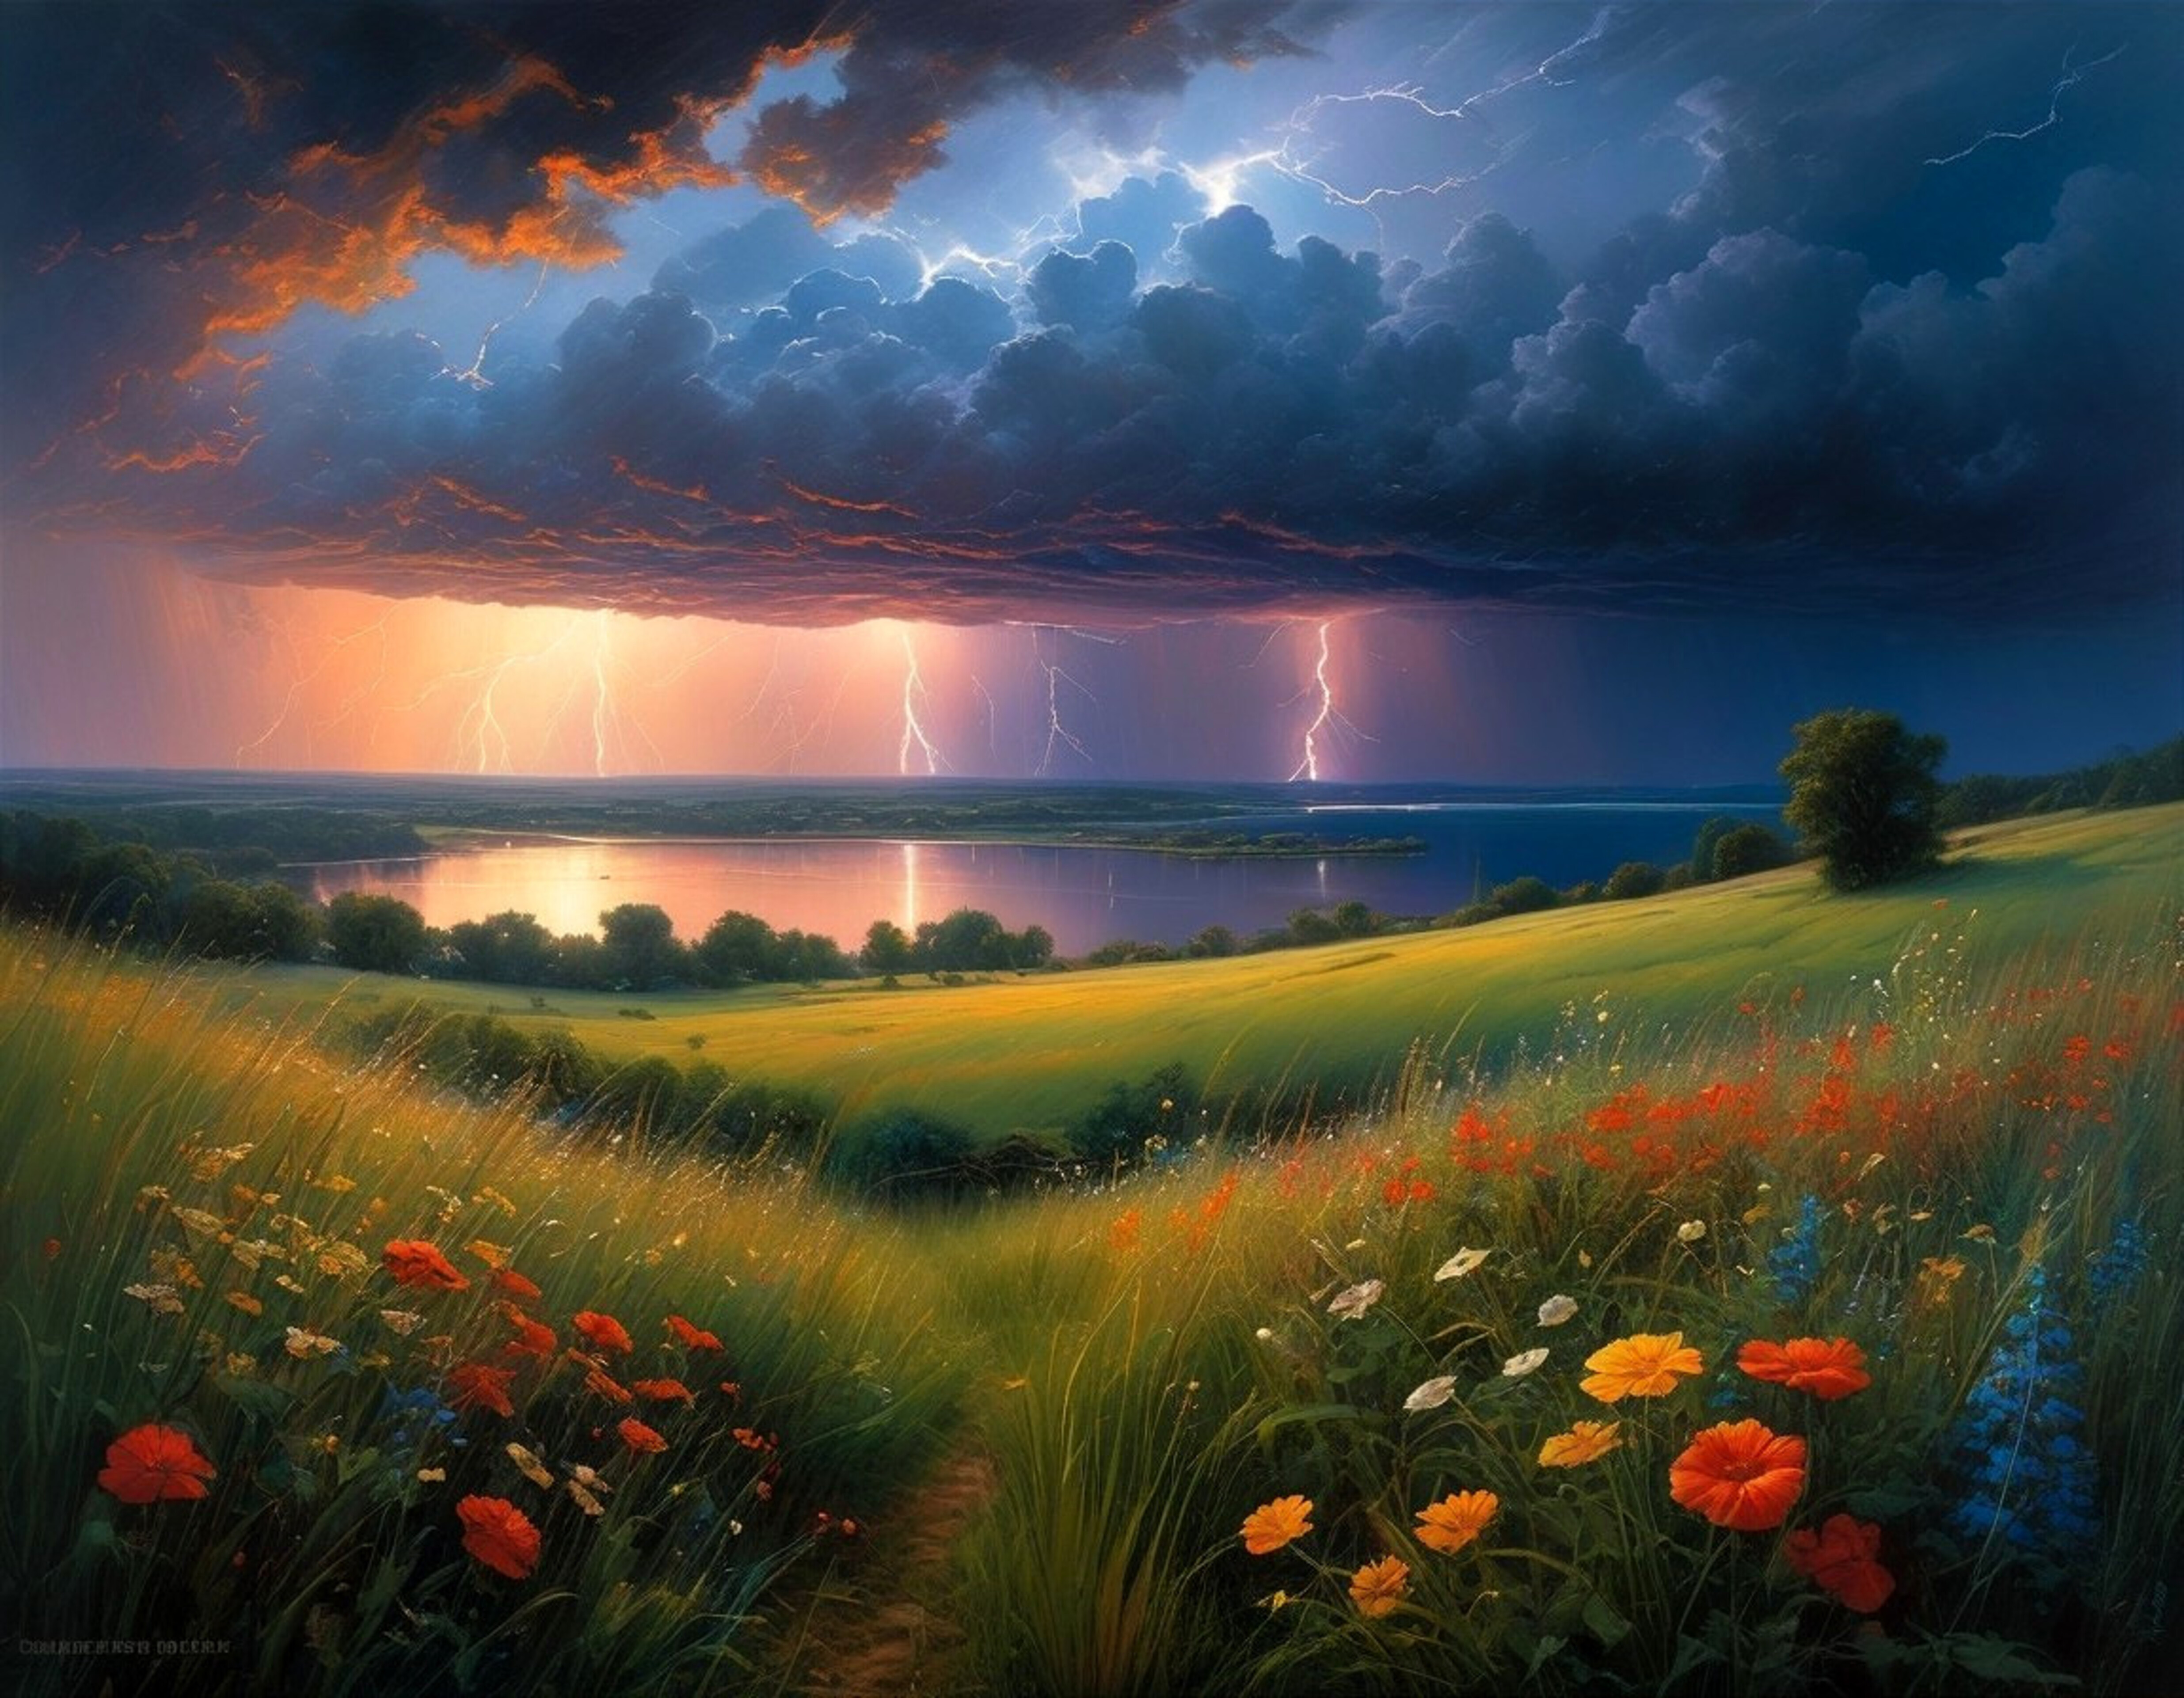 A thunderstorm on a summer night